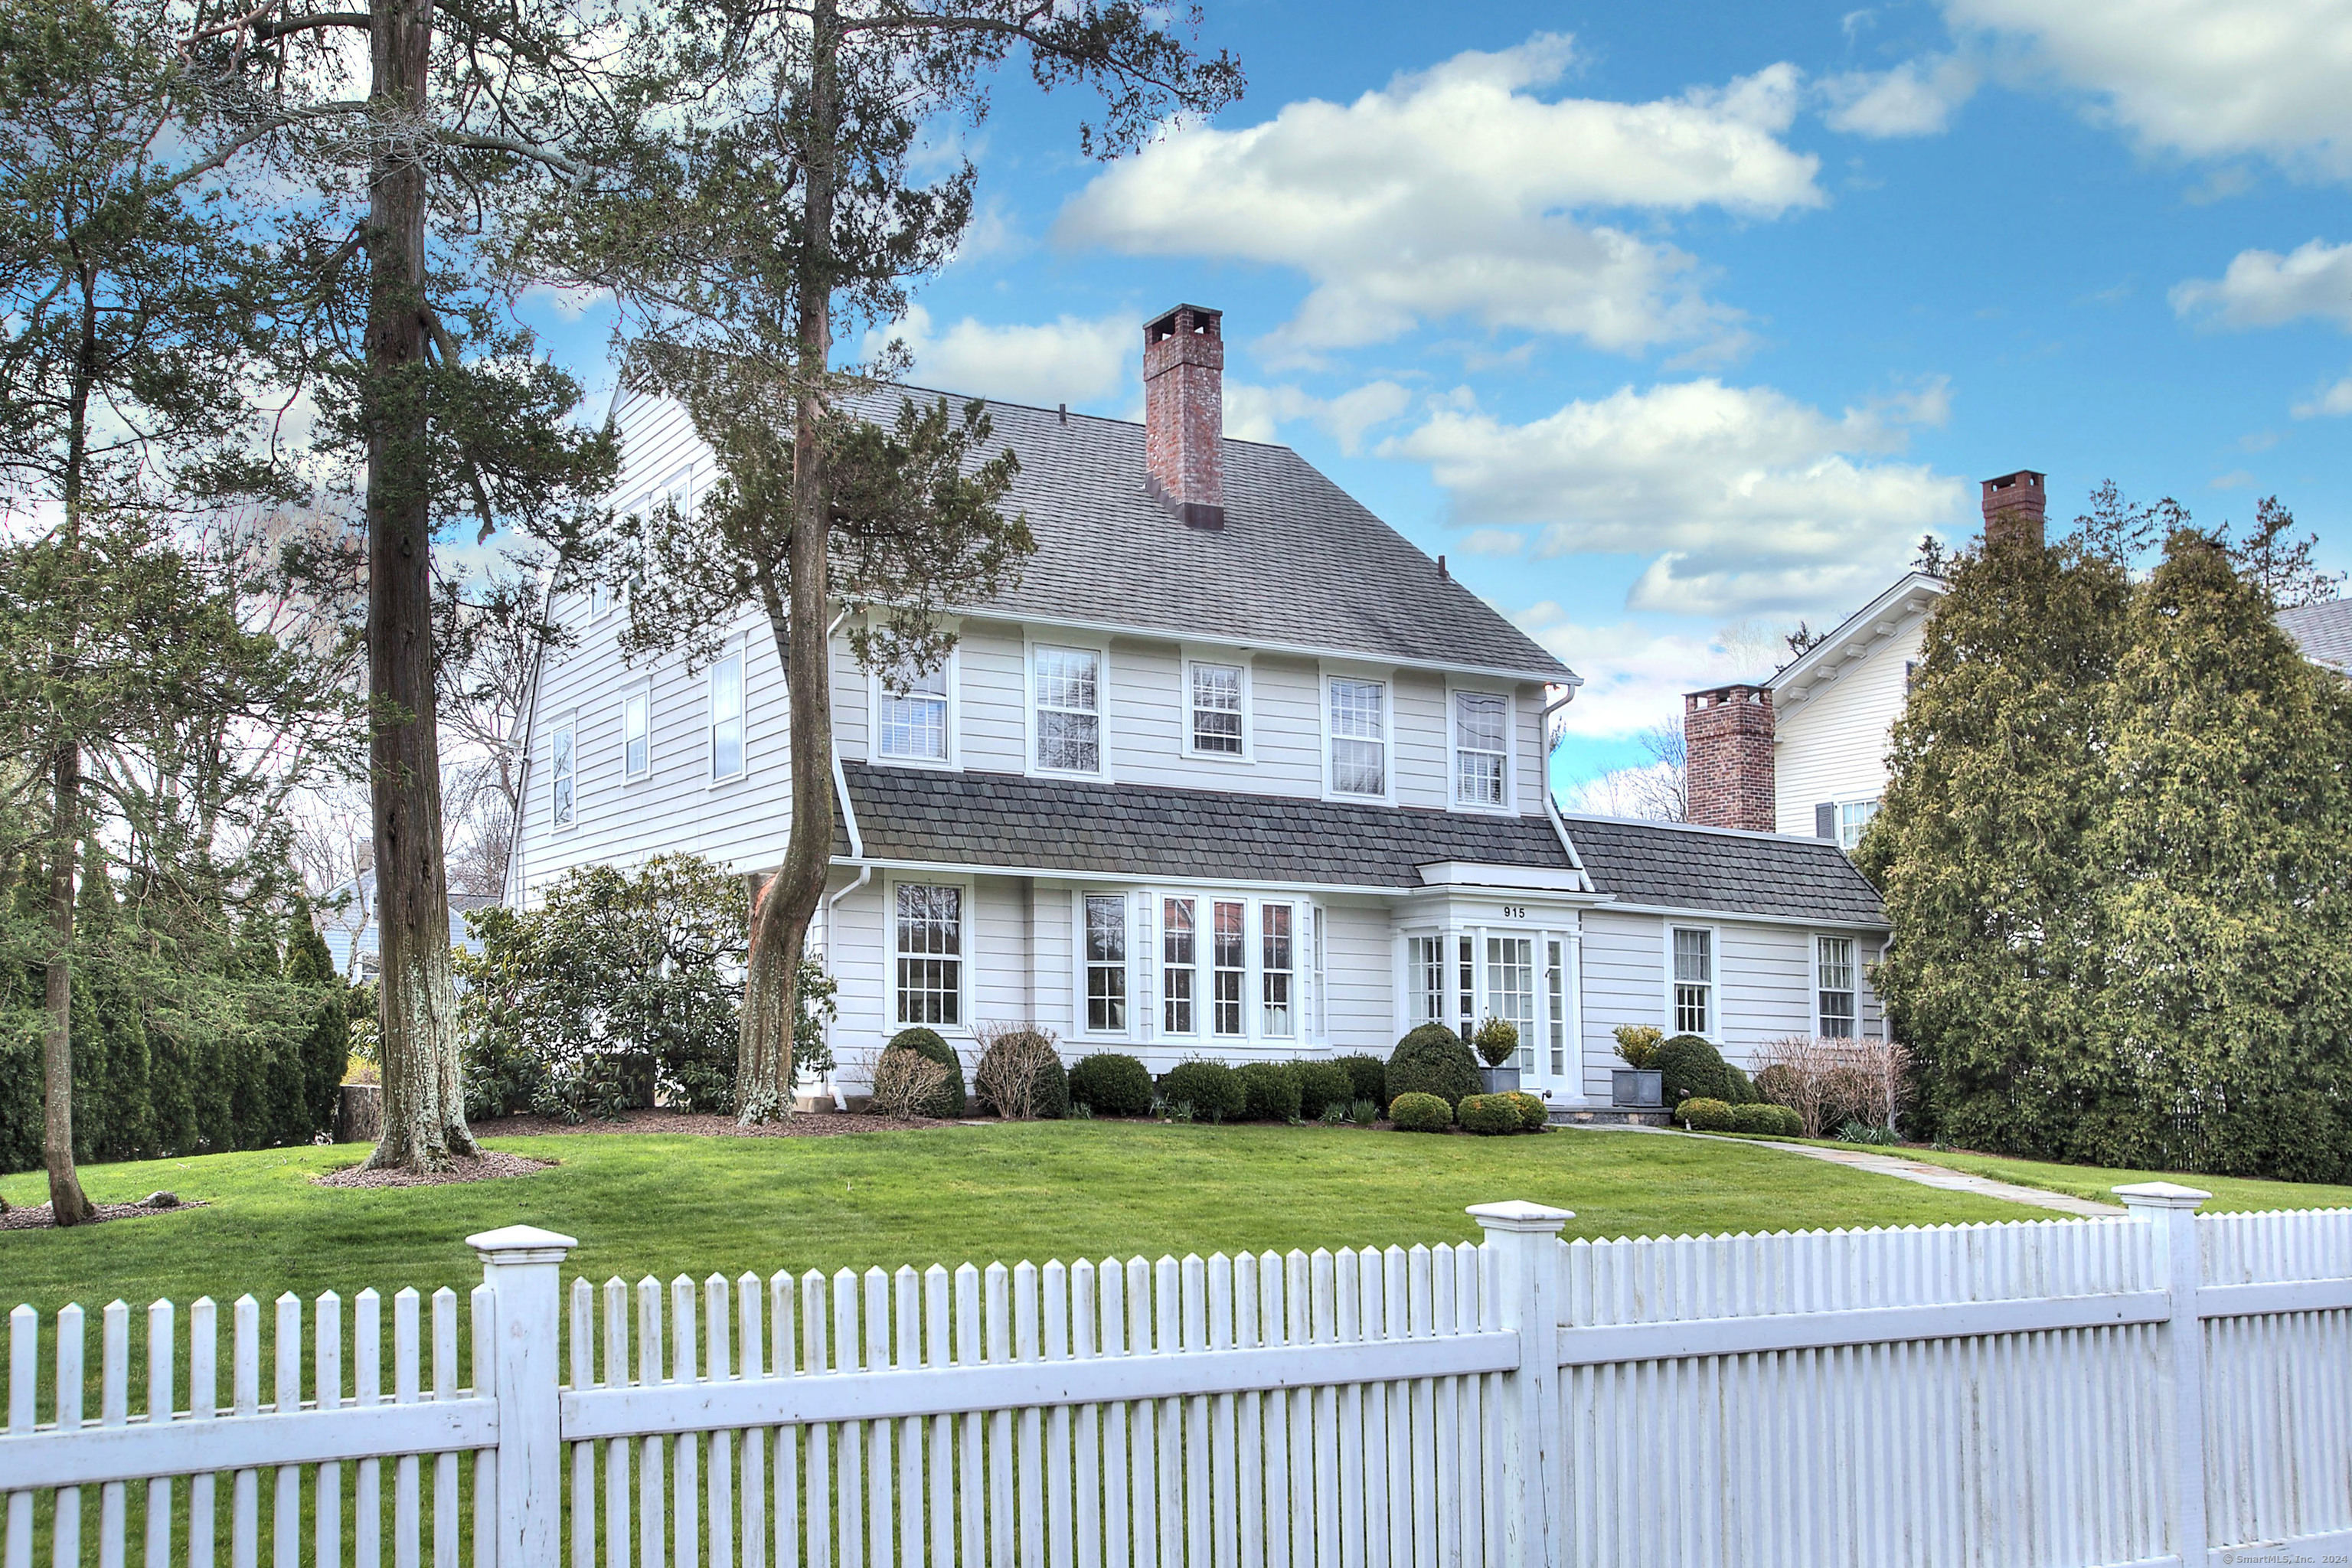 915 Old Post Road, Fairfield, Connecticut - 6 Bedrooms  
5 Bathrooms  
12 Rooms - 